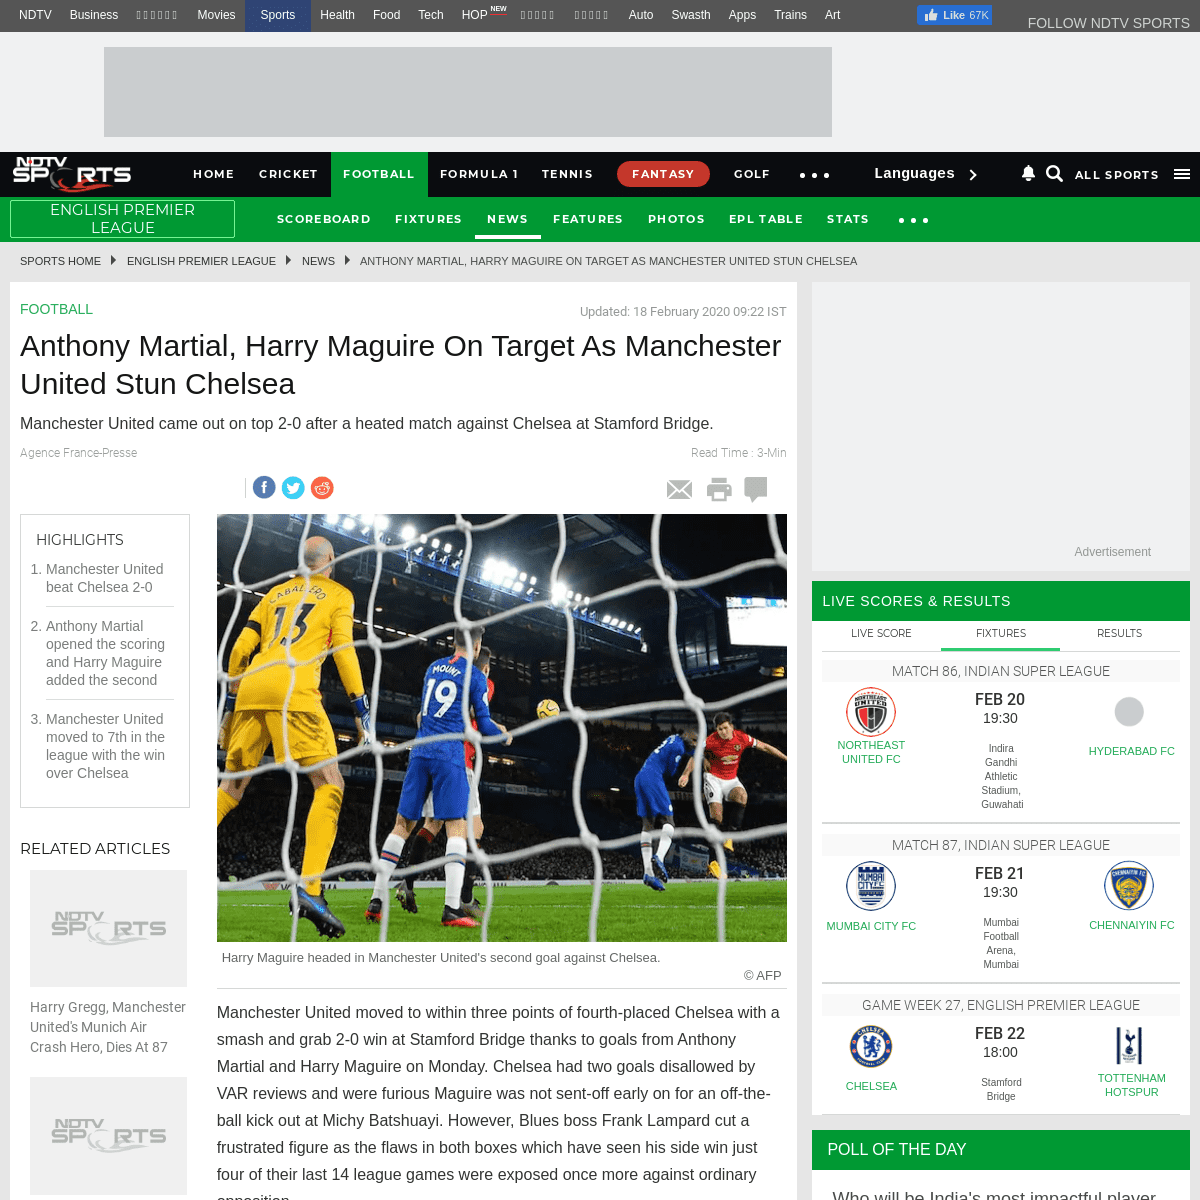 A complete backup of sports.ndtv.com/english-premier-league/chelsea-vs-man-united-anthony-martial-harry-maguire-on-target-as-man